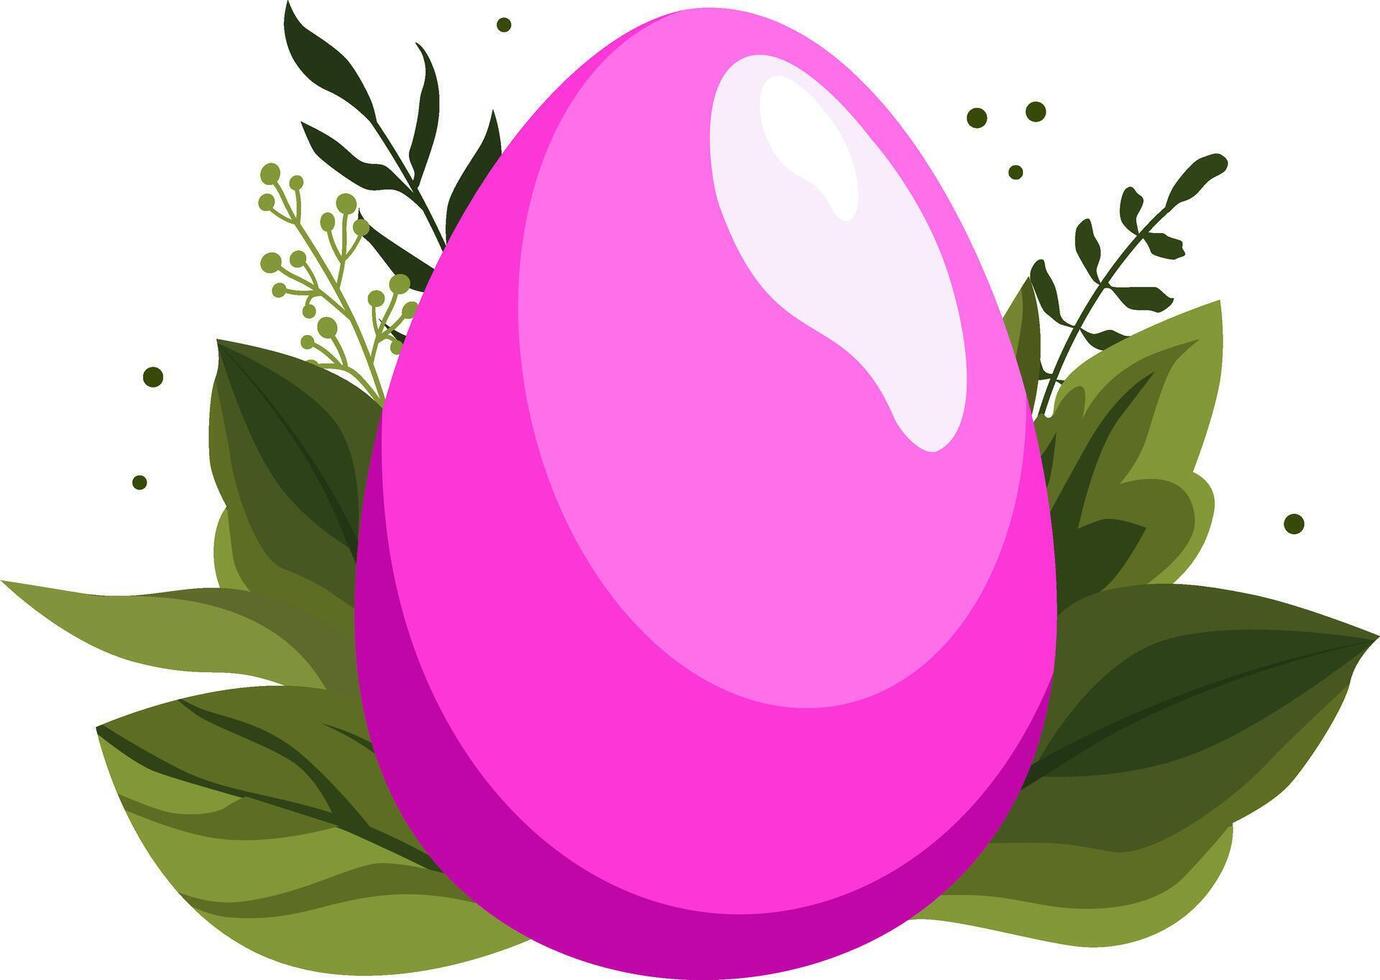 Pink Easter egg with green leaves and branches on background. Illustration in flat style. Vector clipart for design of card, banner, flyer, sale, poster, icons